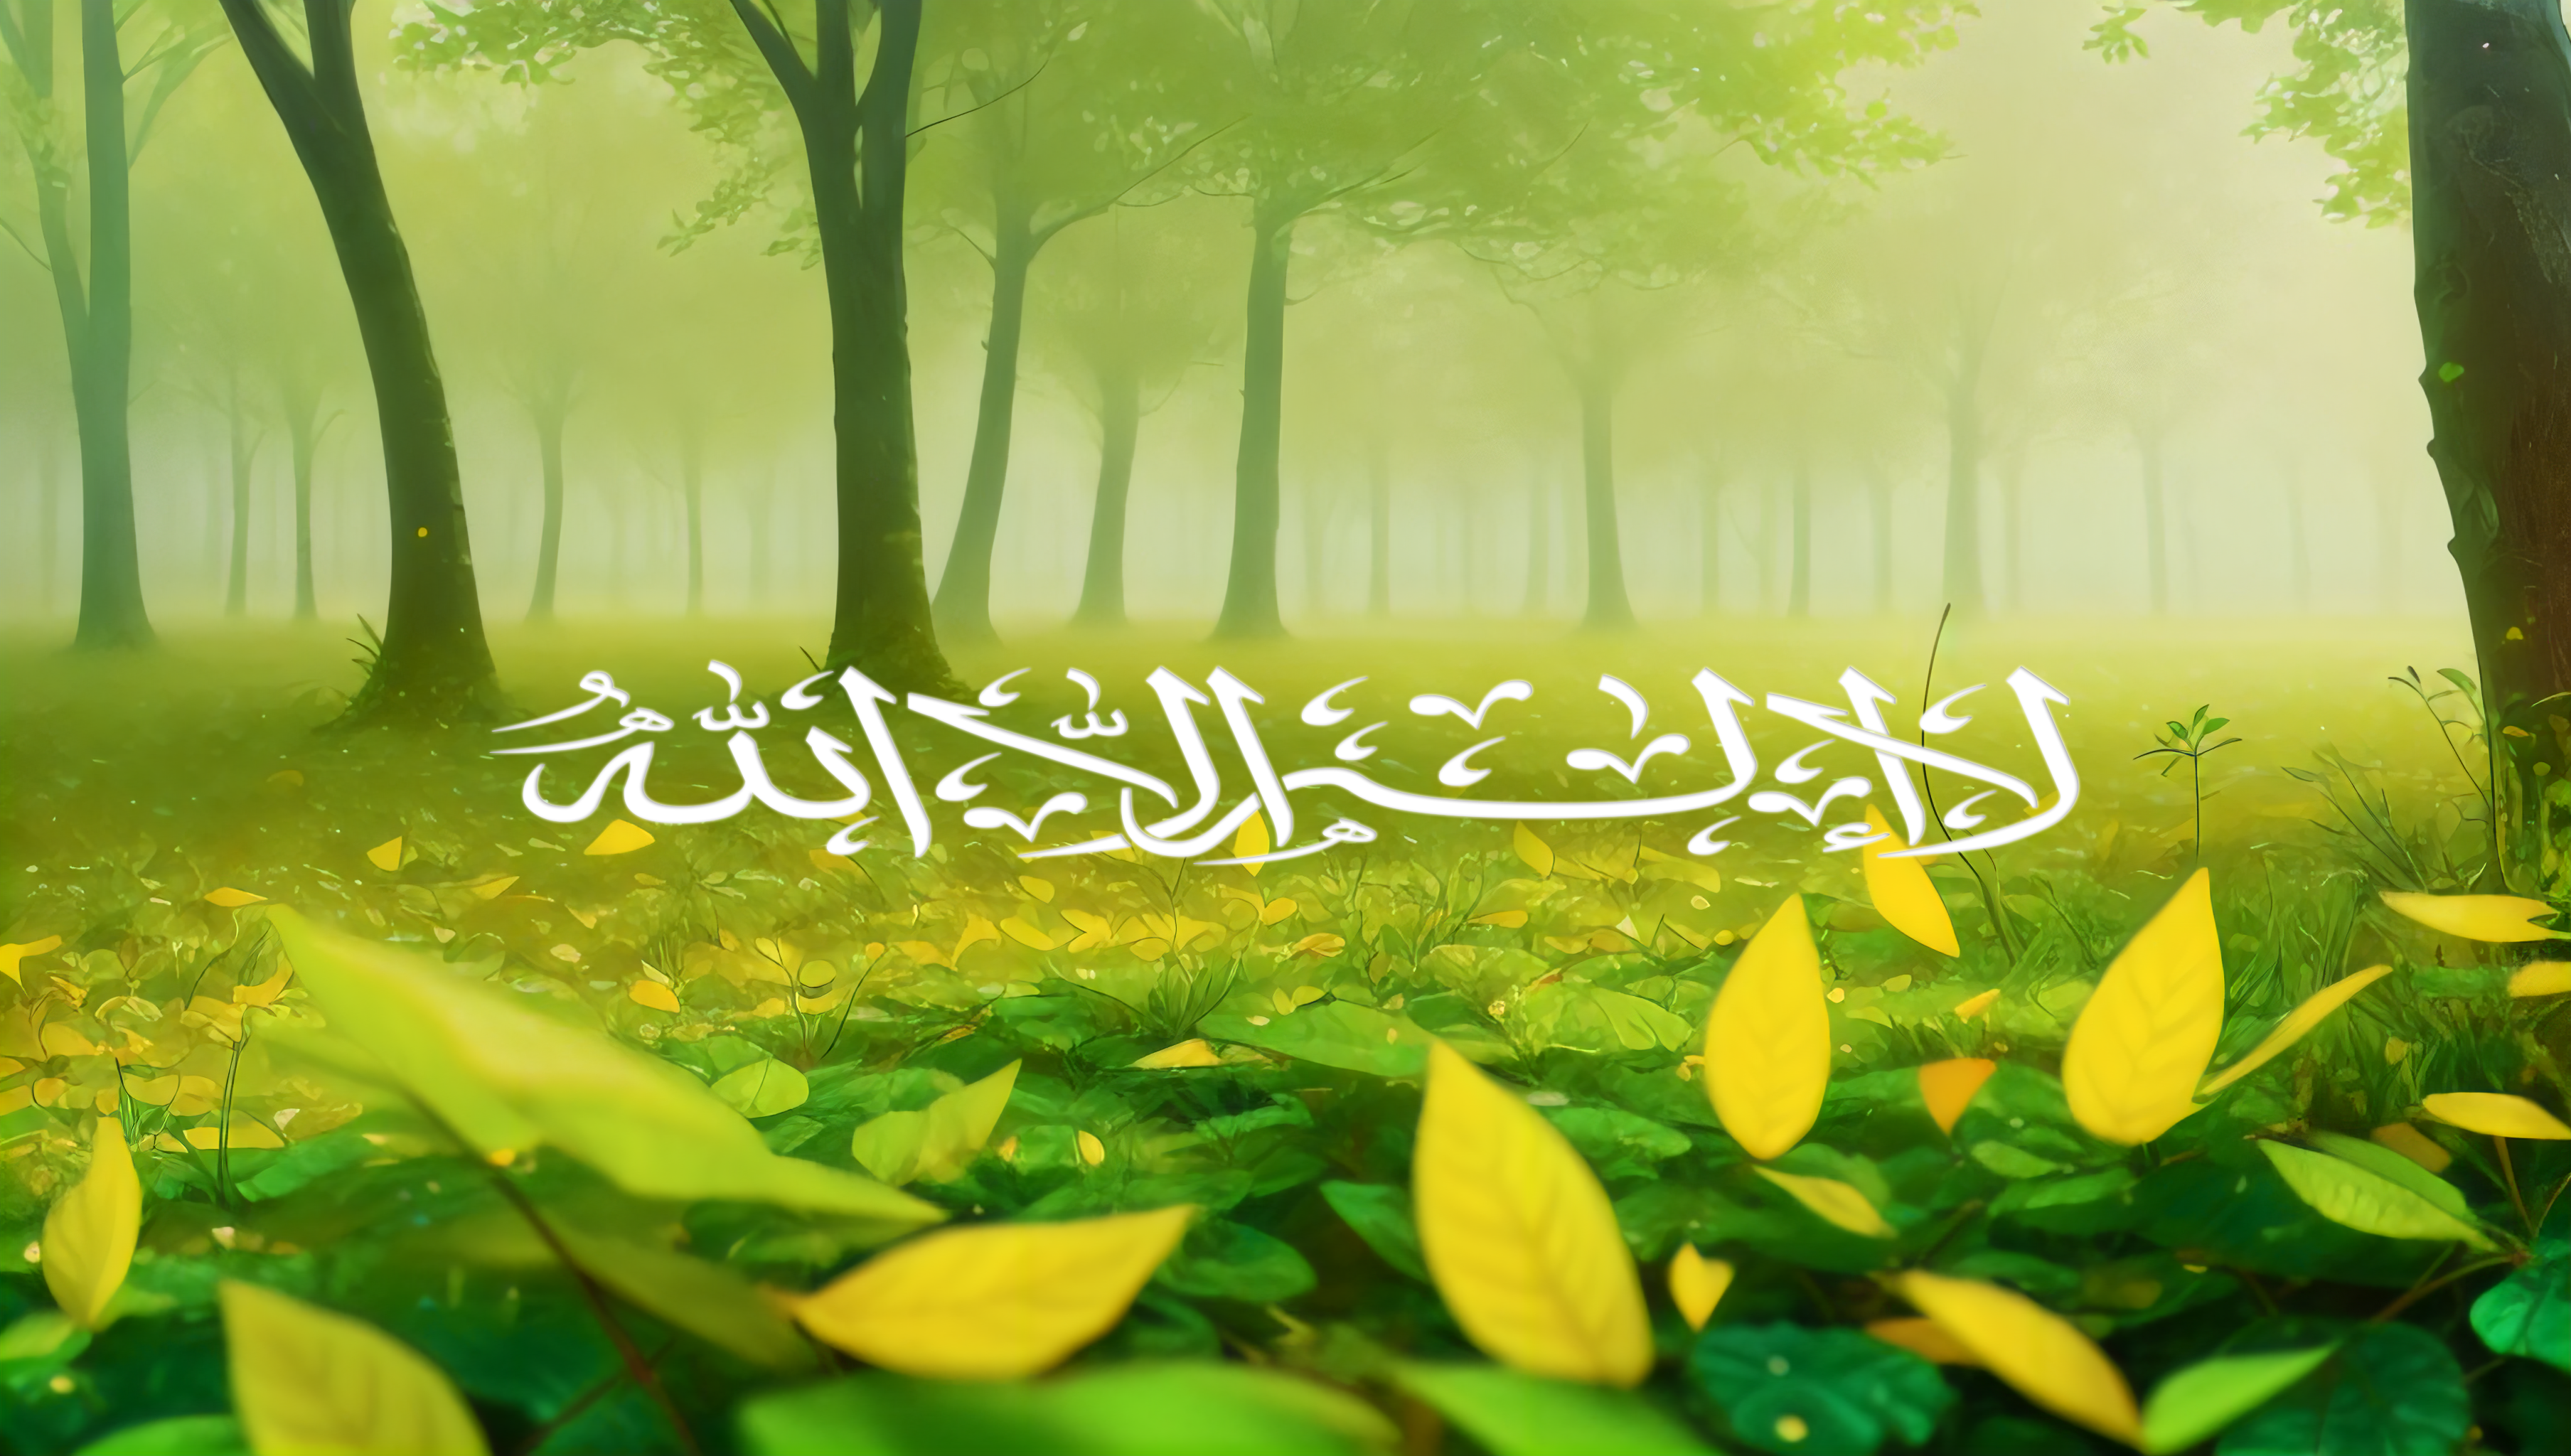 General 3616x2048 AI art religion religious Islam calligraphy nature leaves trees landscape digital painting text forest